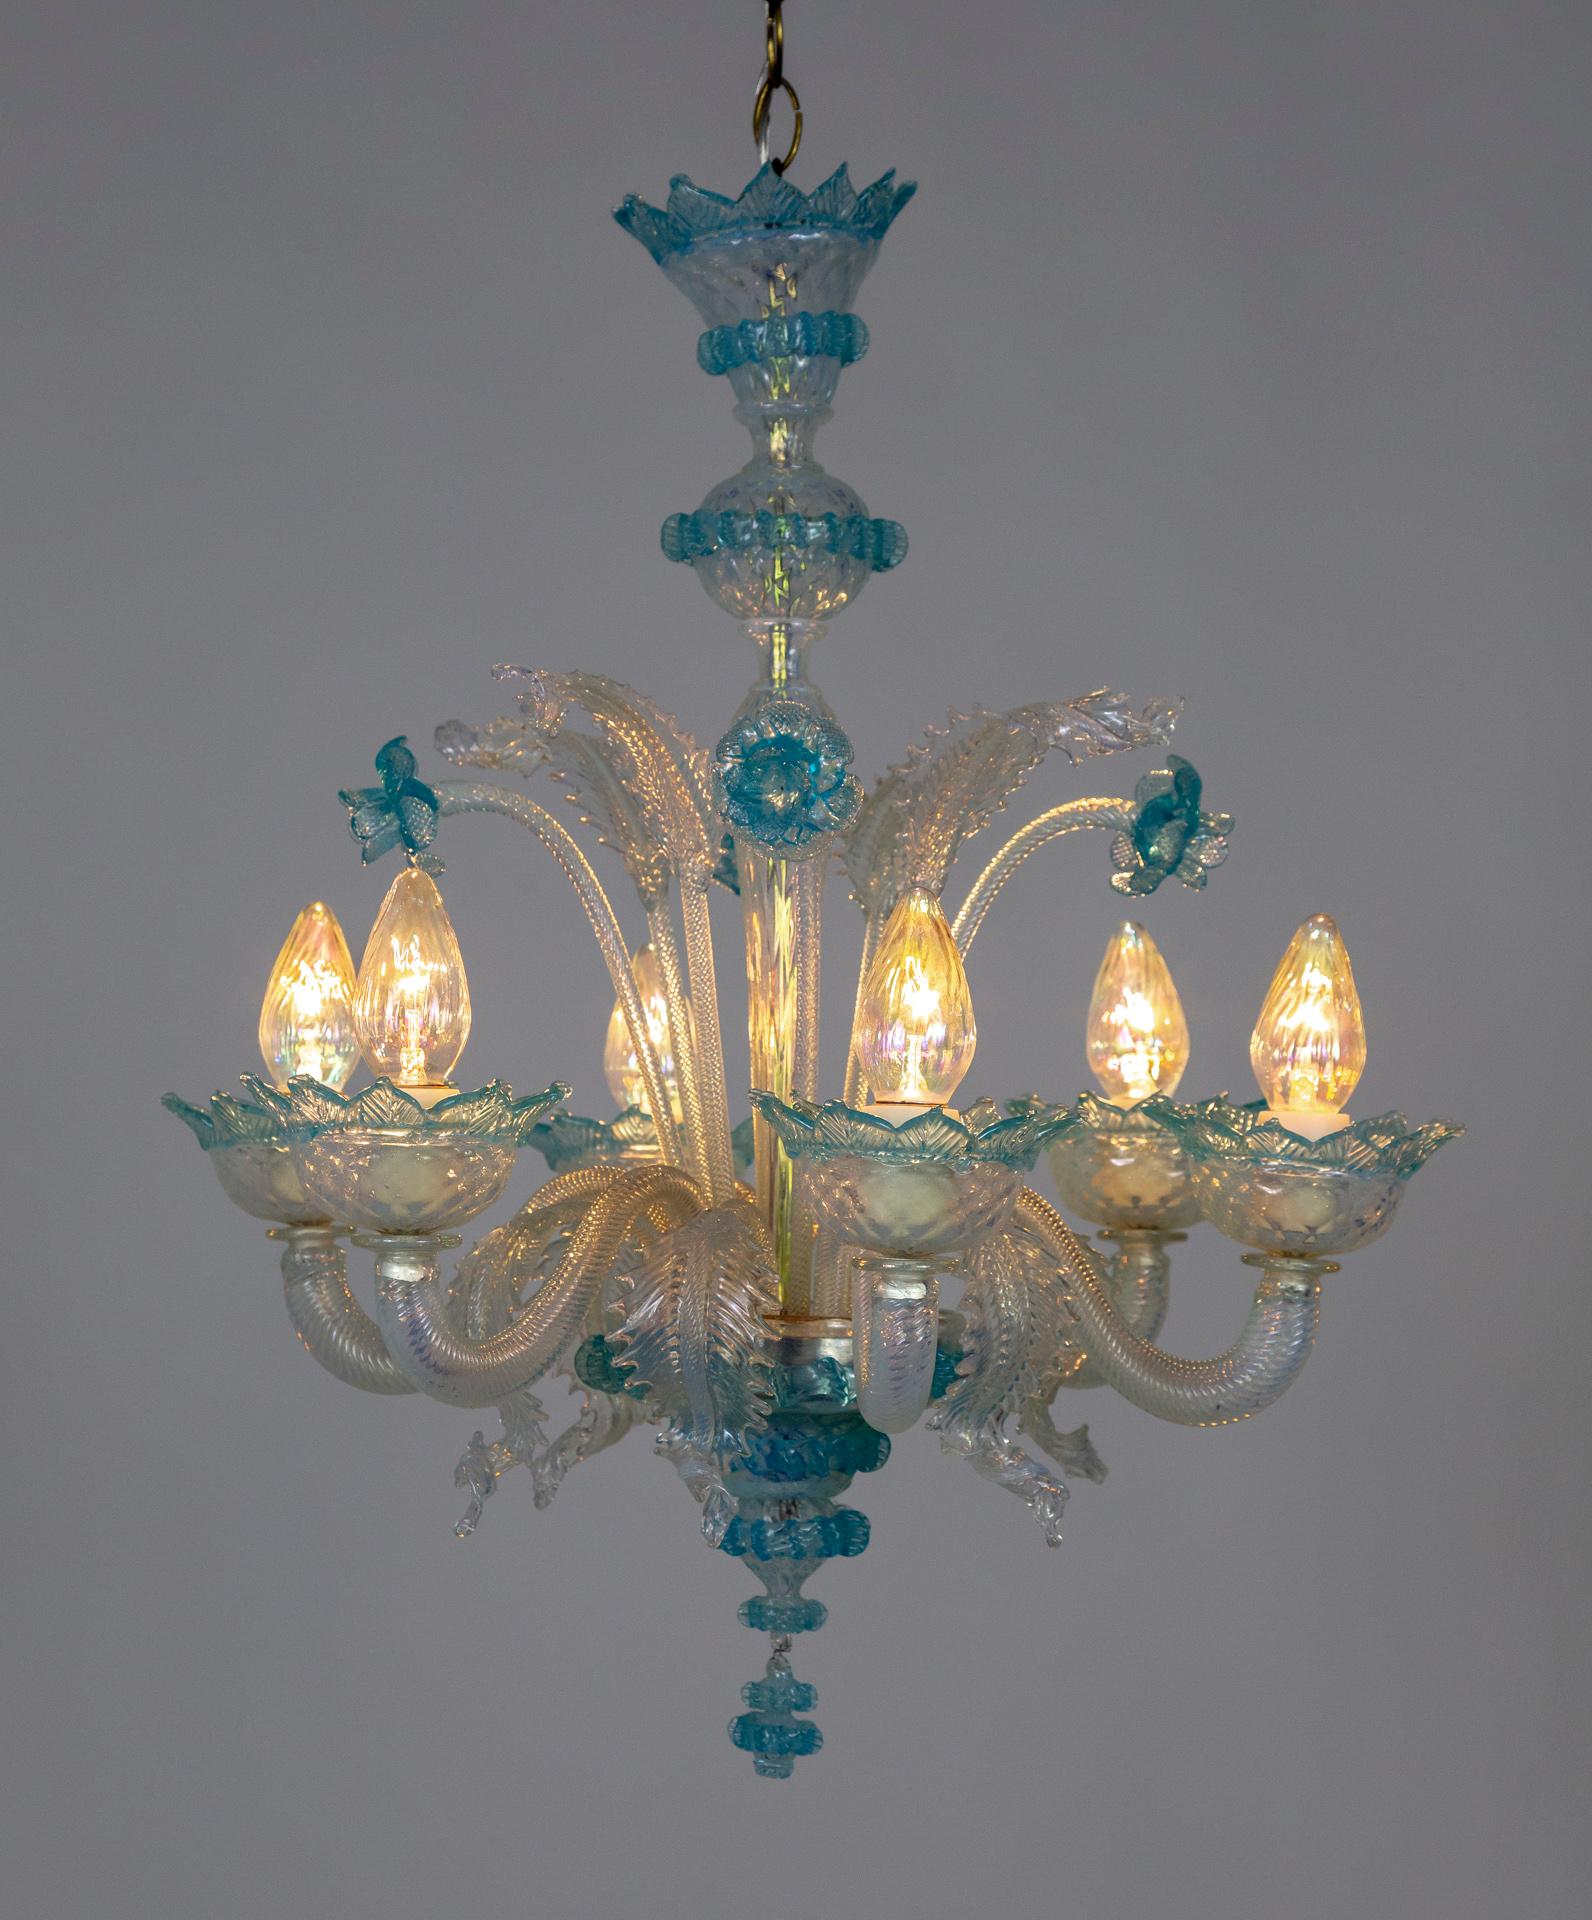 A dazzling 1950s Murano glass chandelier in iridescent white and light blue; embellished with sprouting daffodils and 2 sizes of shimmering leaves. The 6 arms have a twisted, ribbed texture and the body and flowers knit-molded. Attributed to